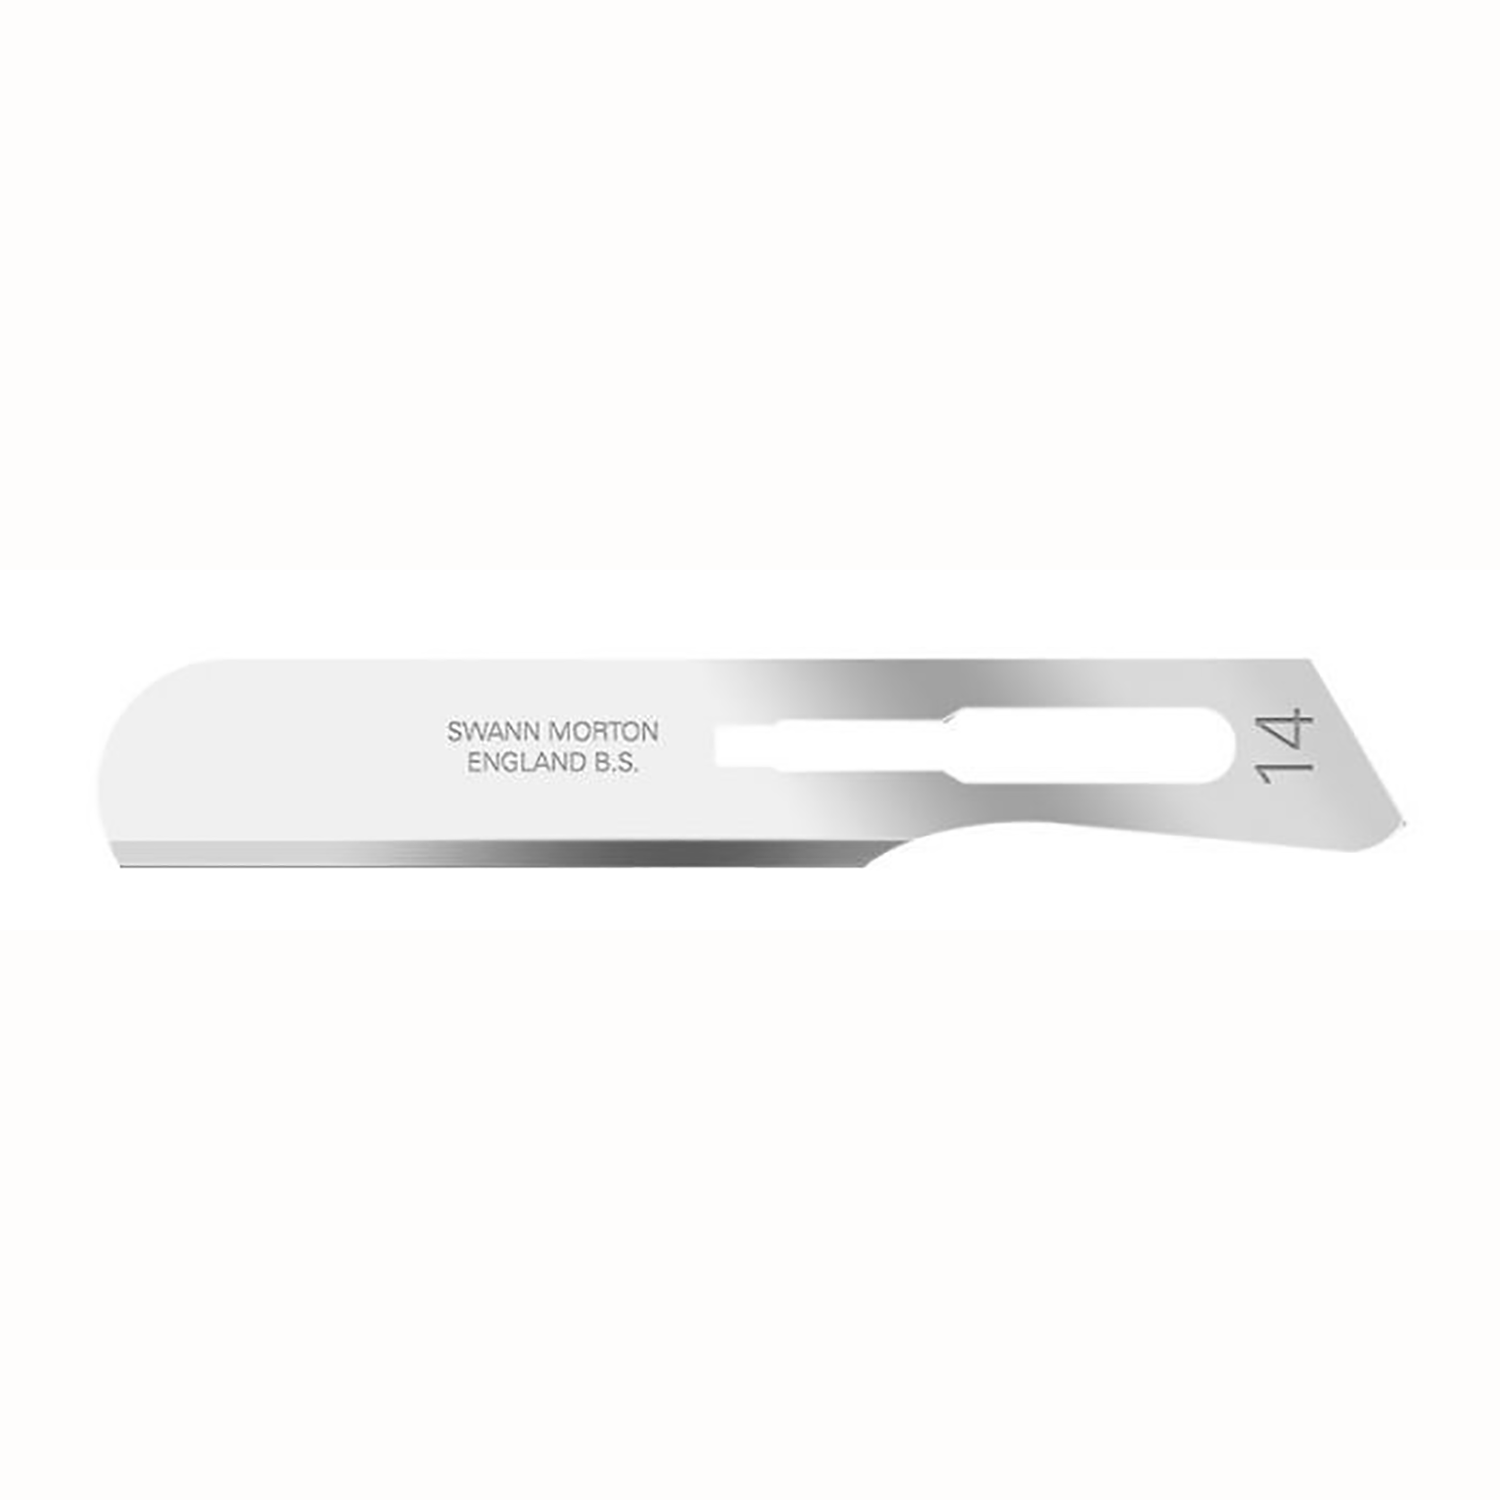 Swann Morton Carbon Steel Surgical Blades | No.14 | Pack of 100 | Short Expiry Date